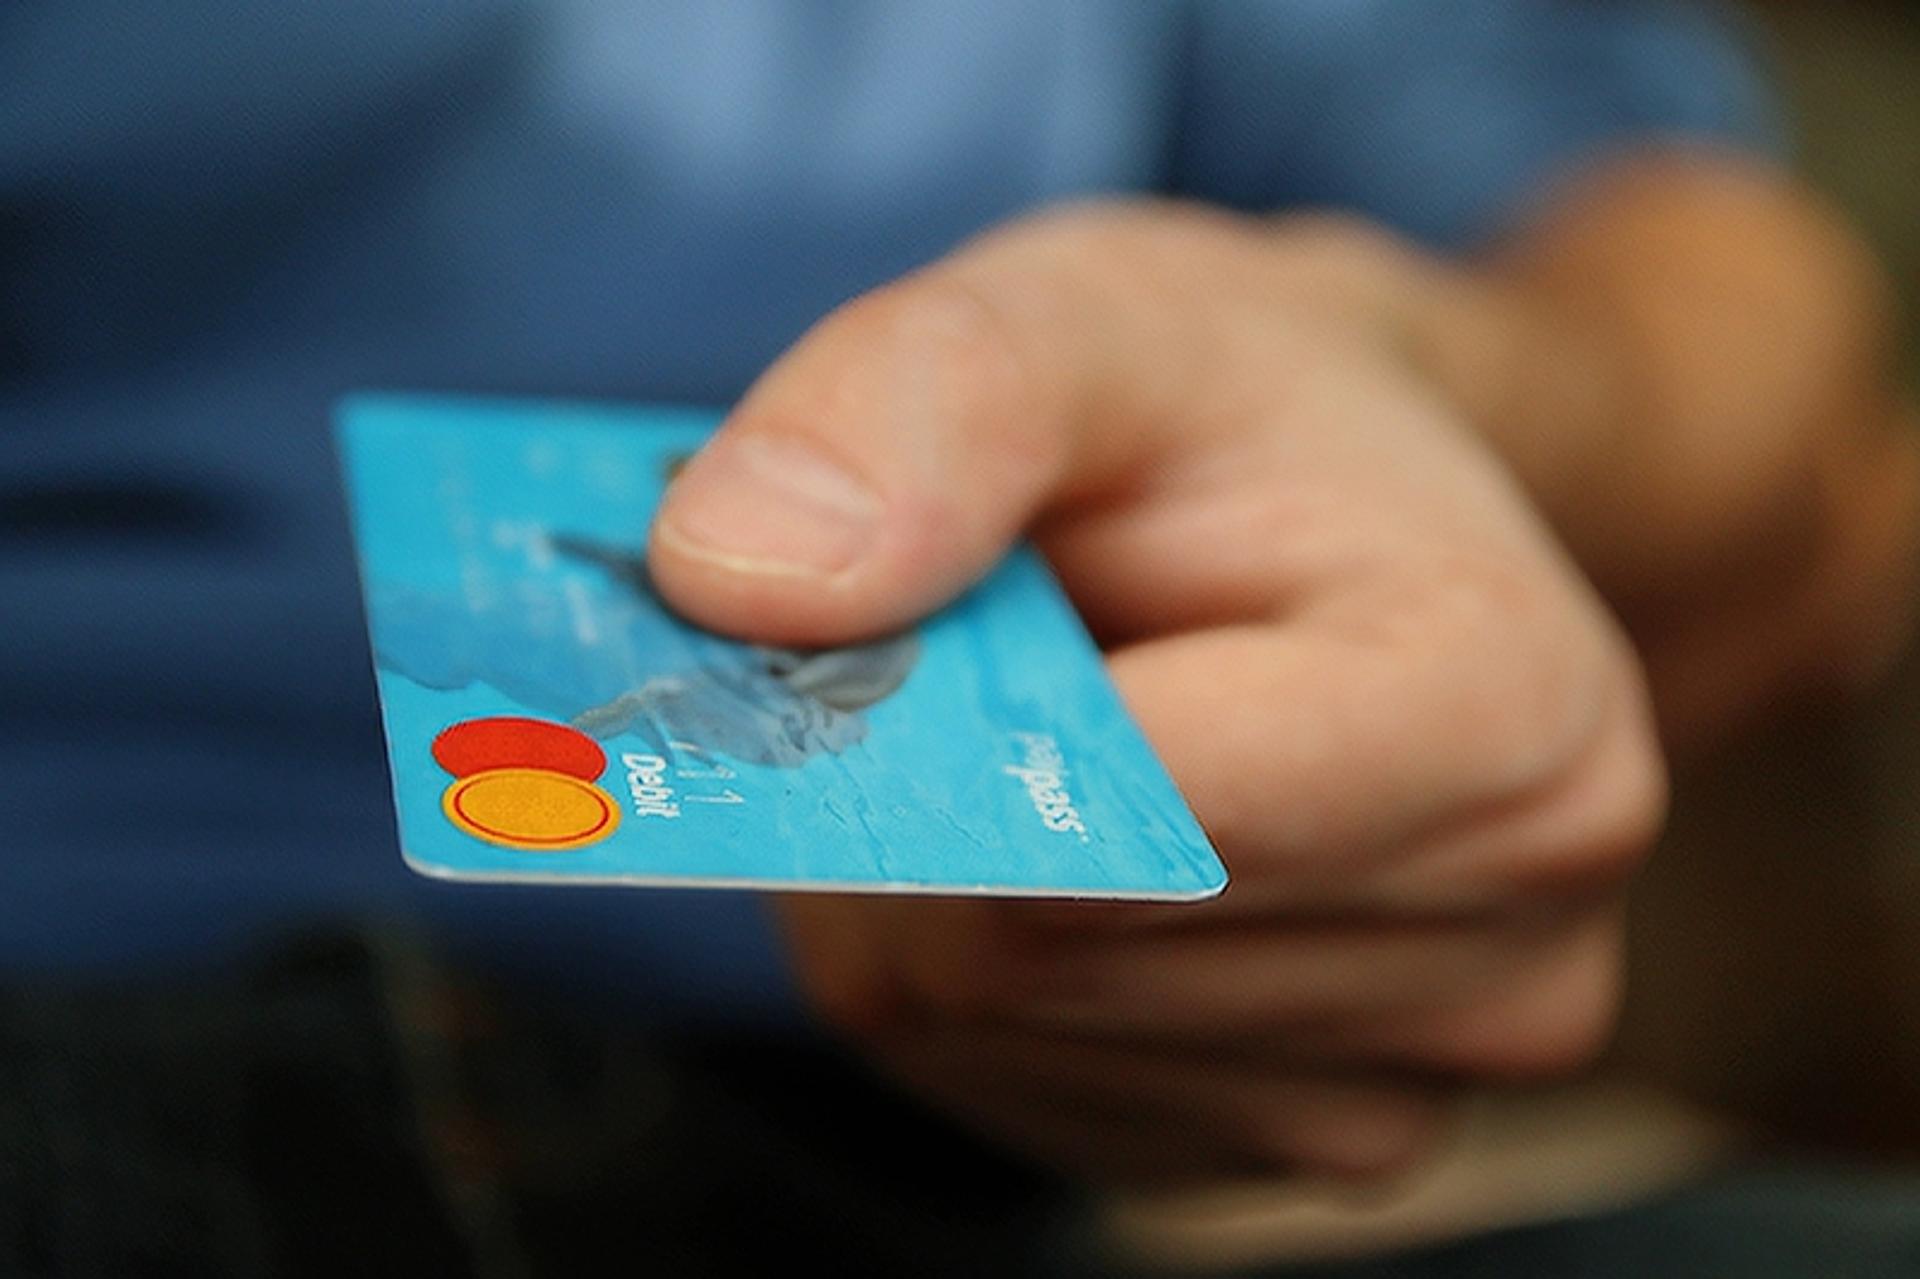 Image of a man handing over a credit card